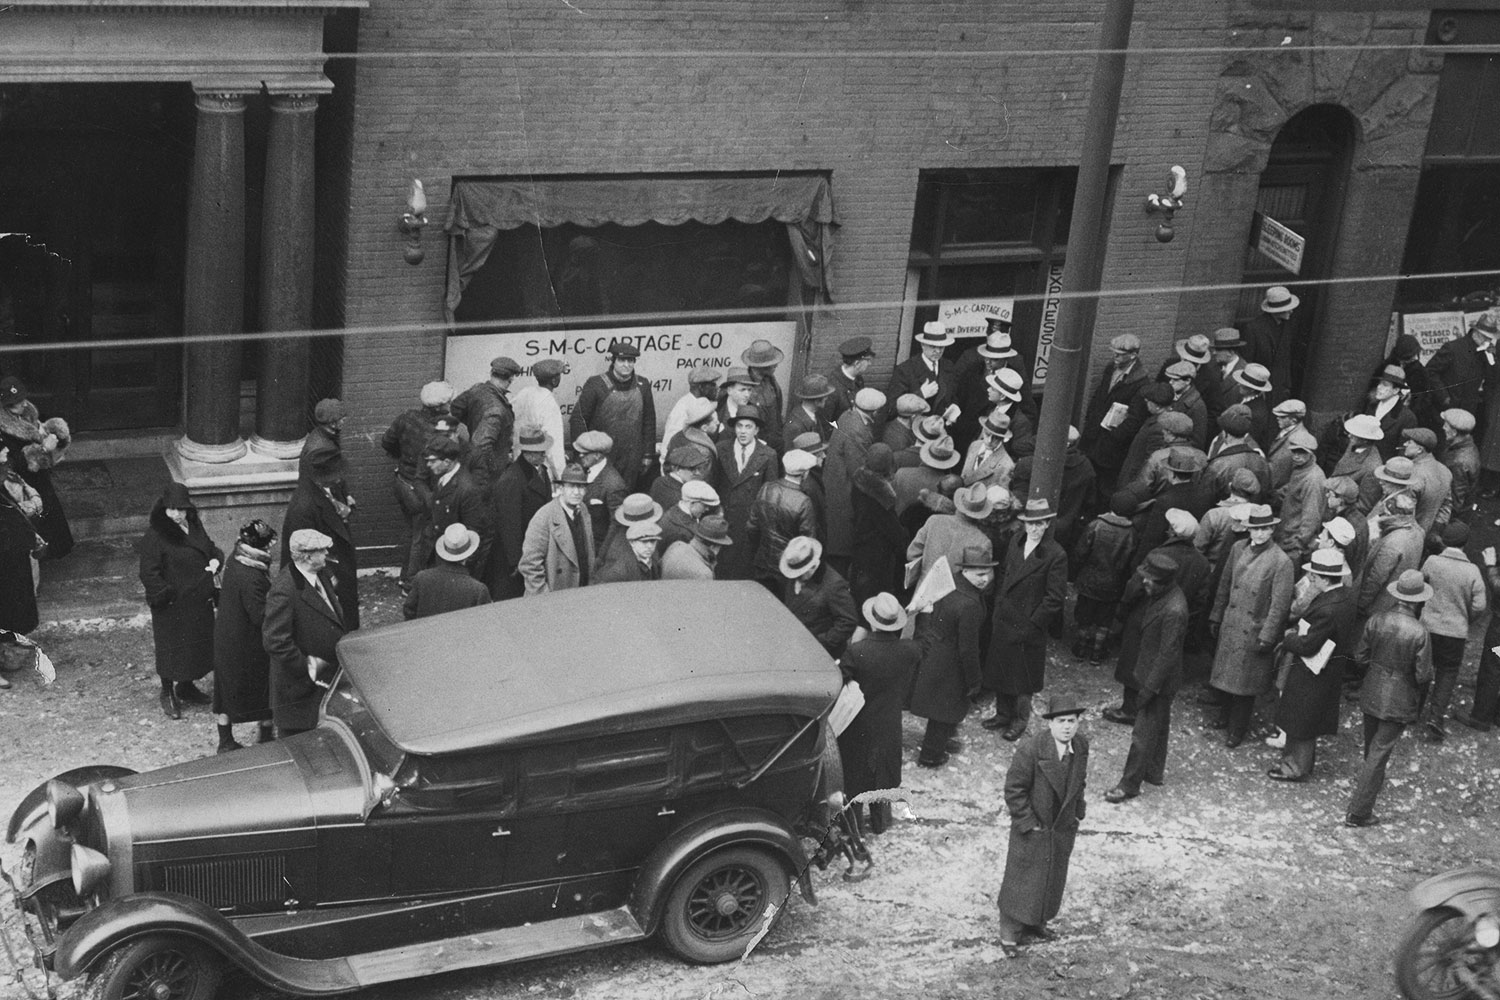 A crowd outside the Clark Street garage, owned by George “Bugs” Moran, where the St. Valentine’s Day massacre took place.